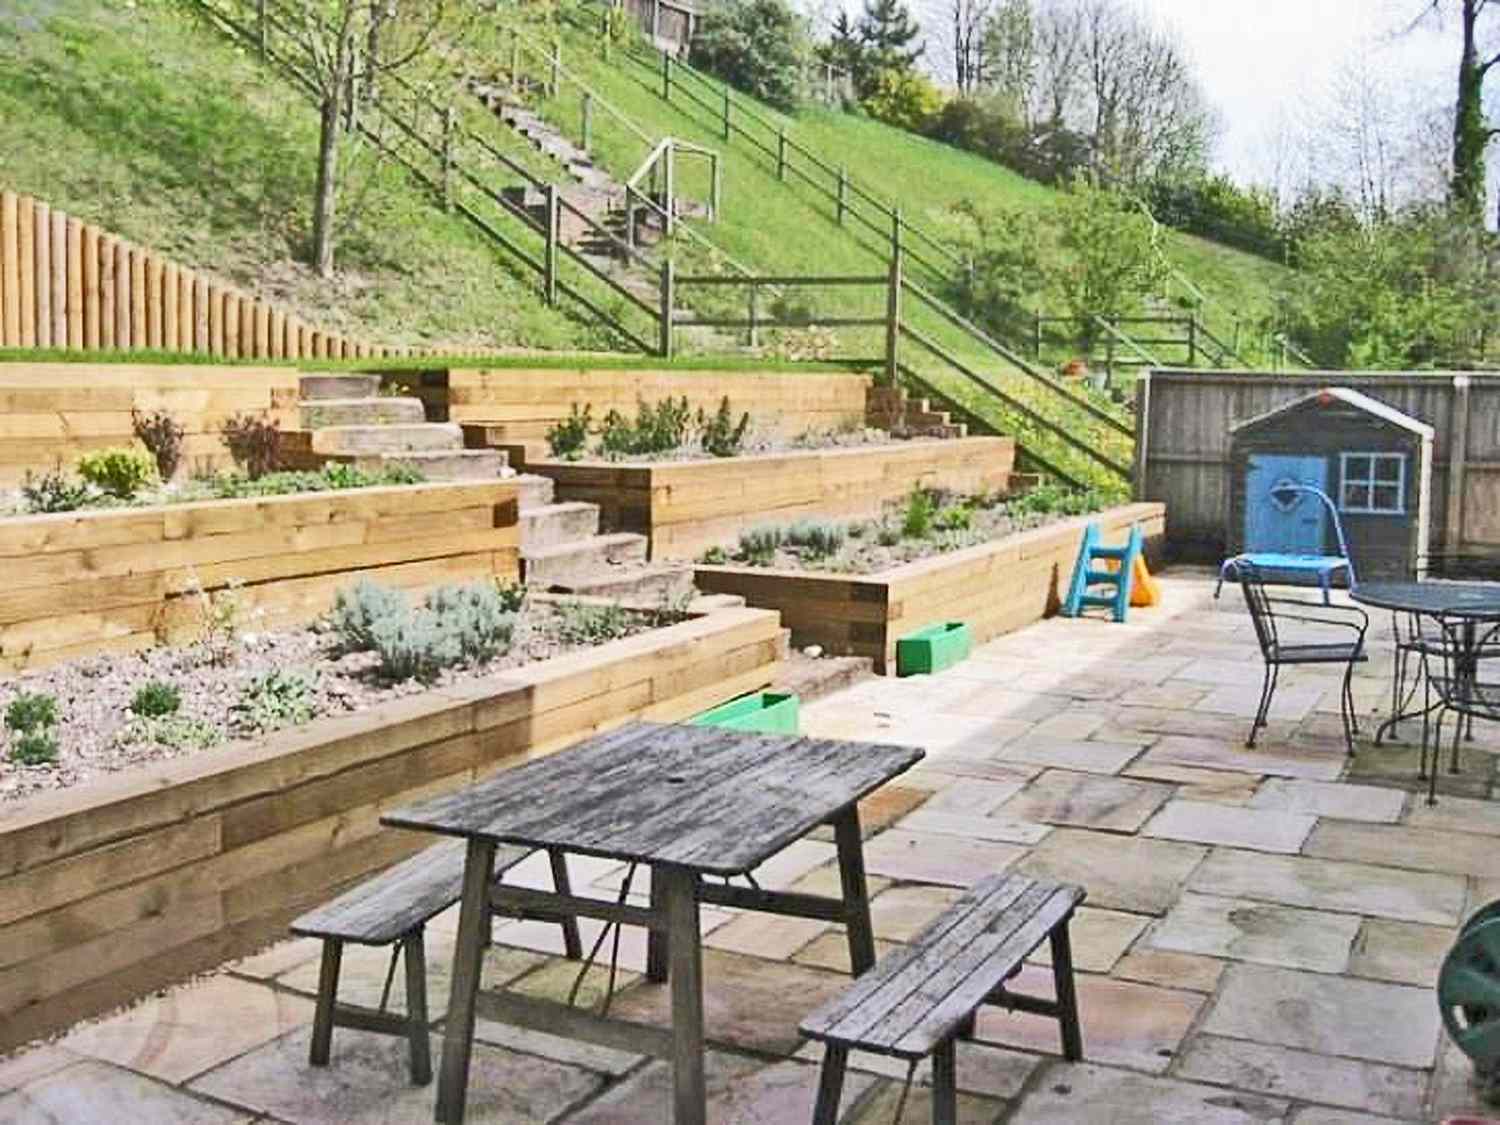 Terraced Wooden Planters